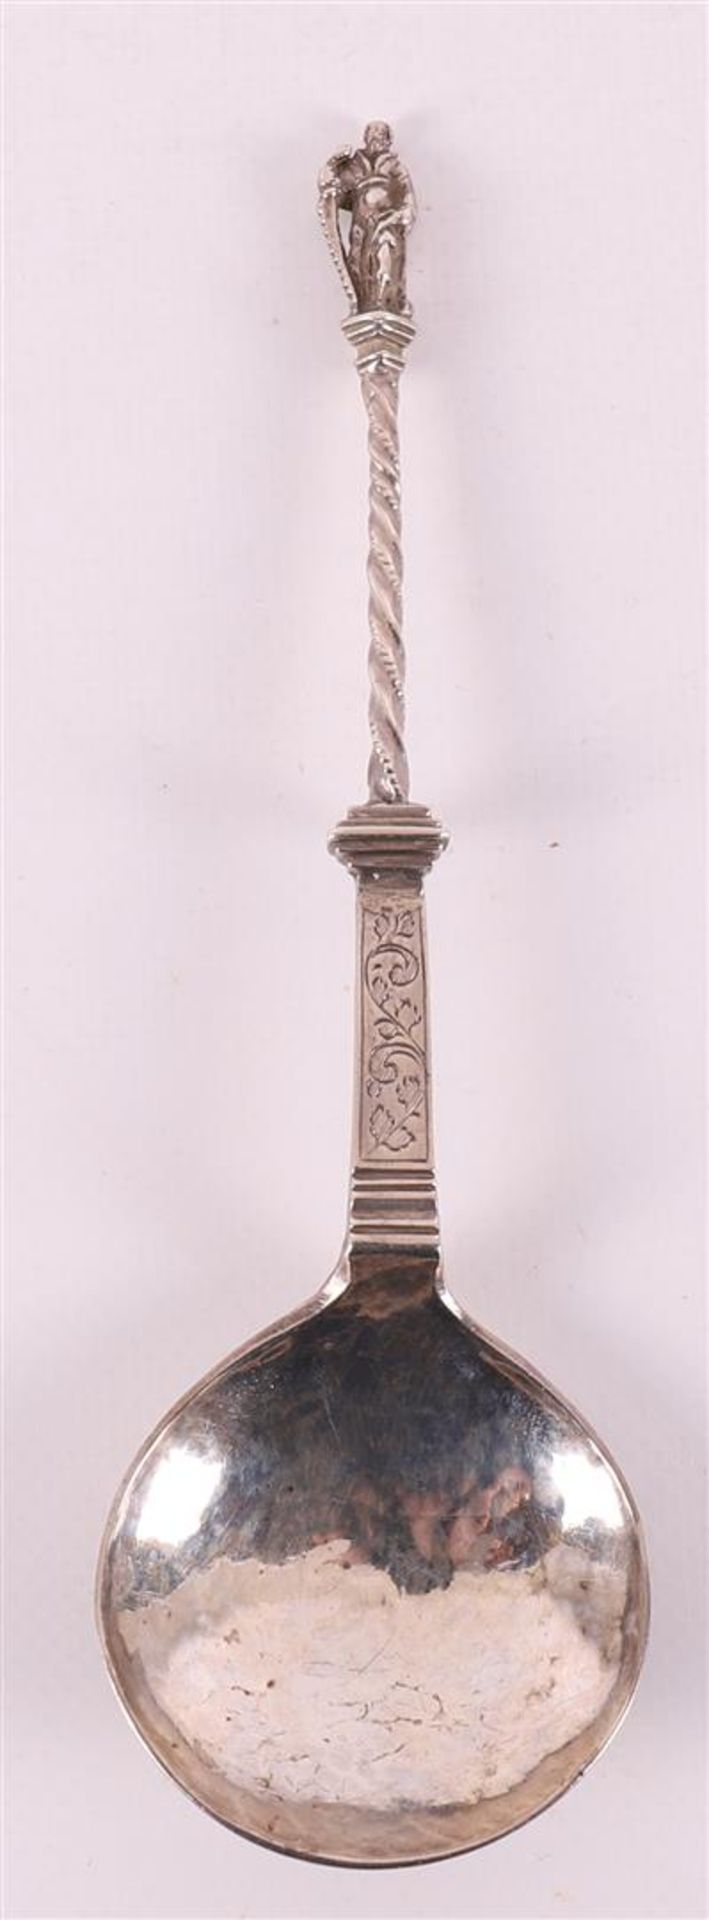 A first grade silver apostle's spoon, Groningen, 17th century.